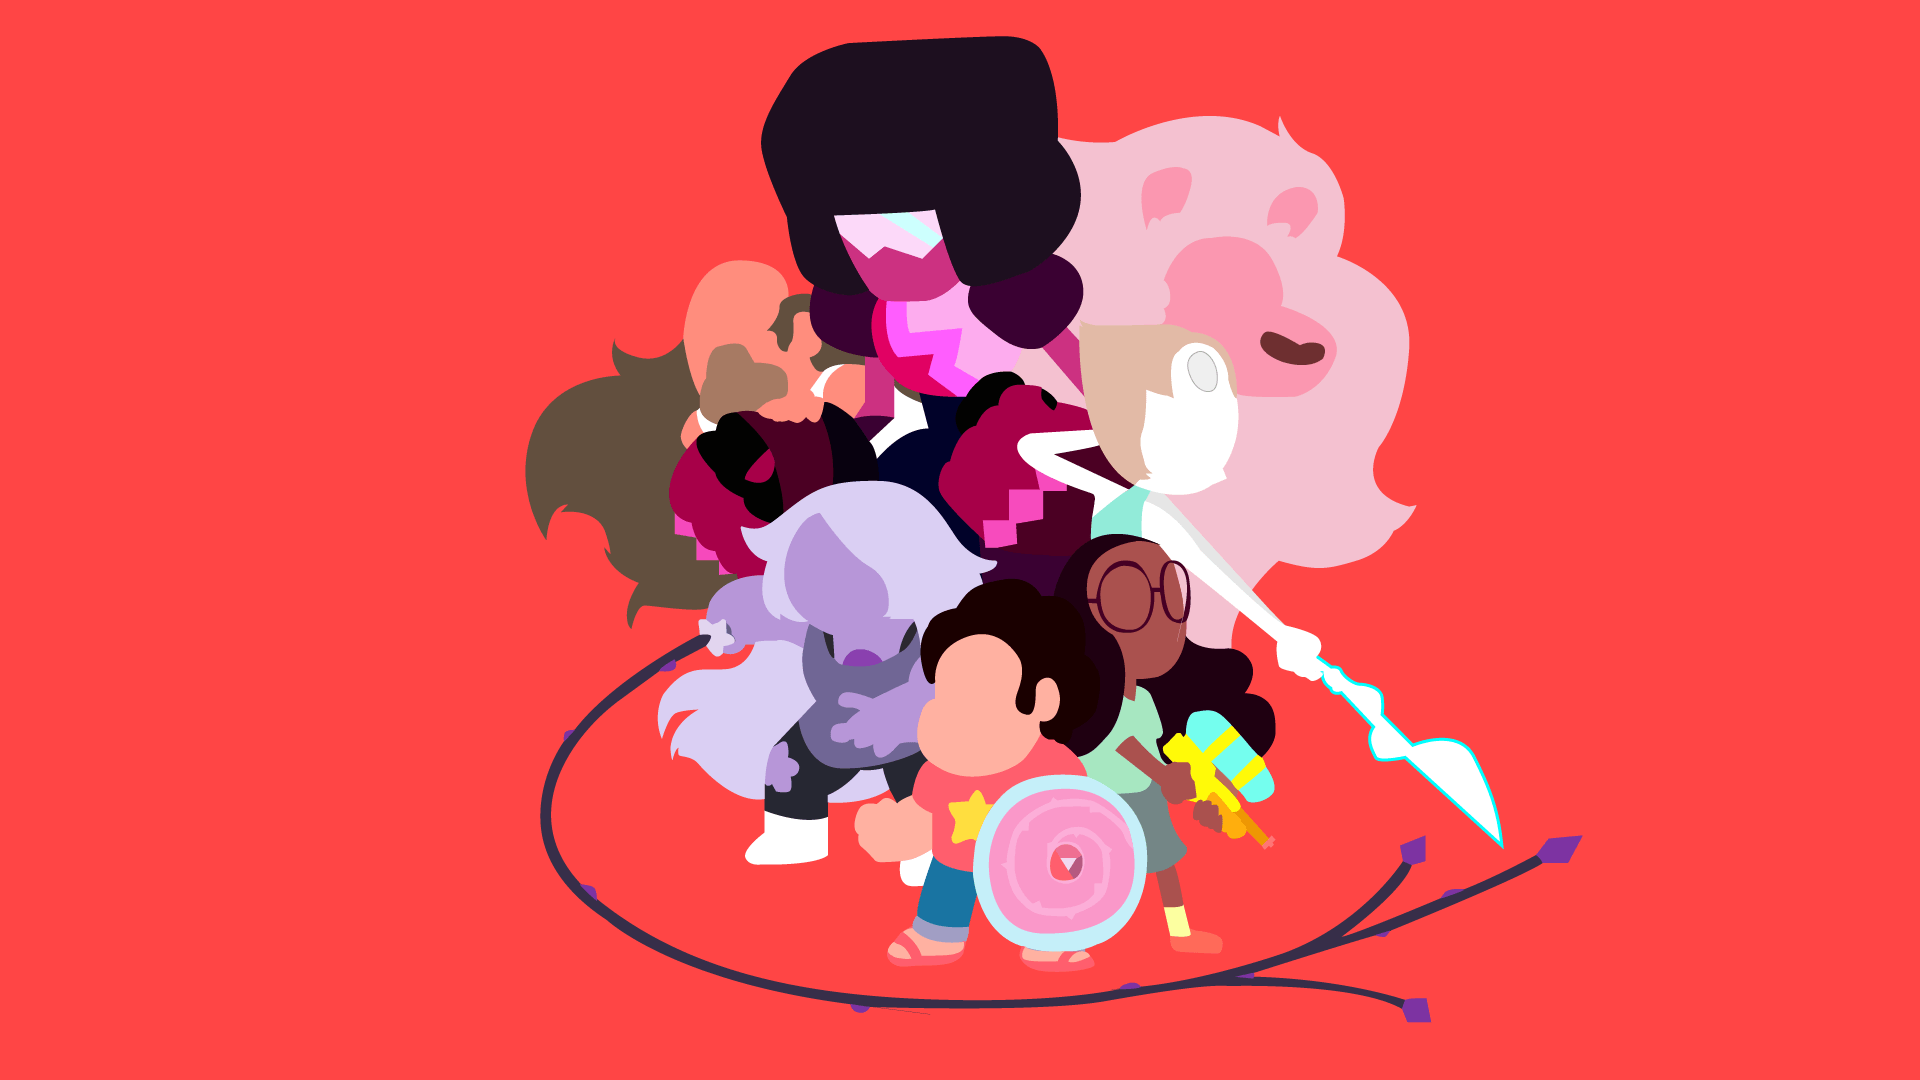 Just made this Steven Universe minimalist background! 1920